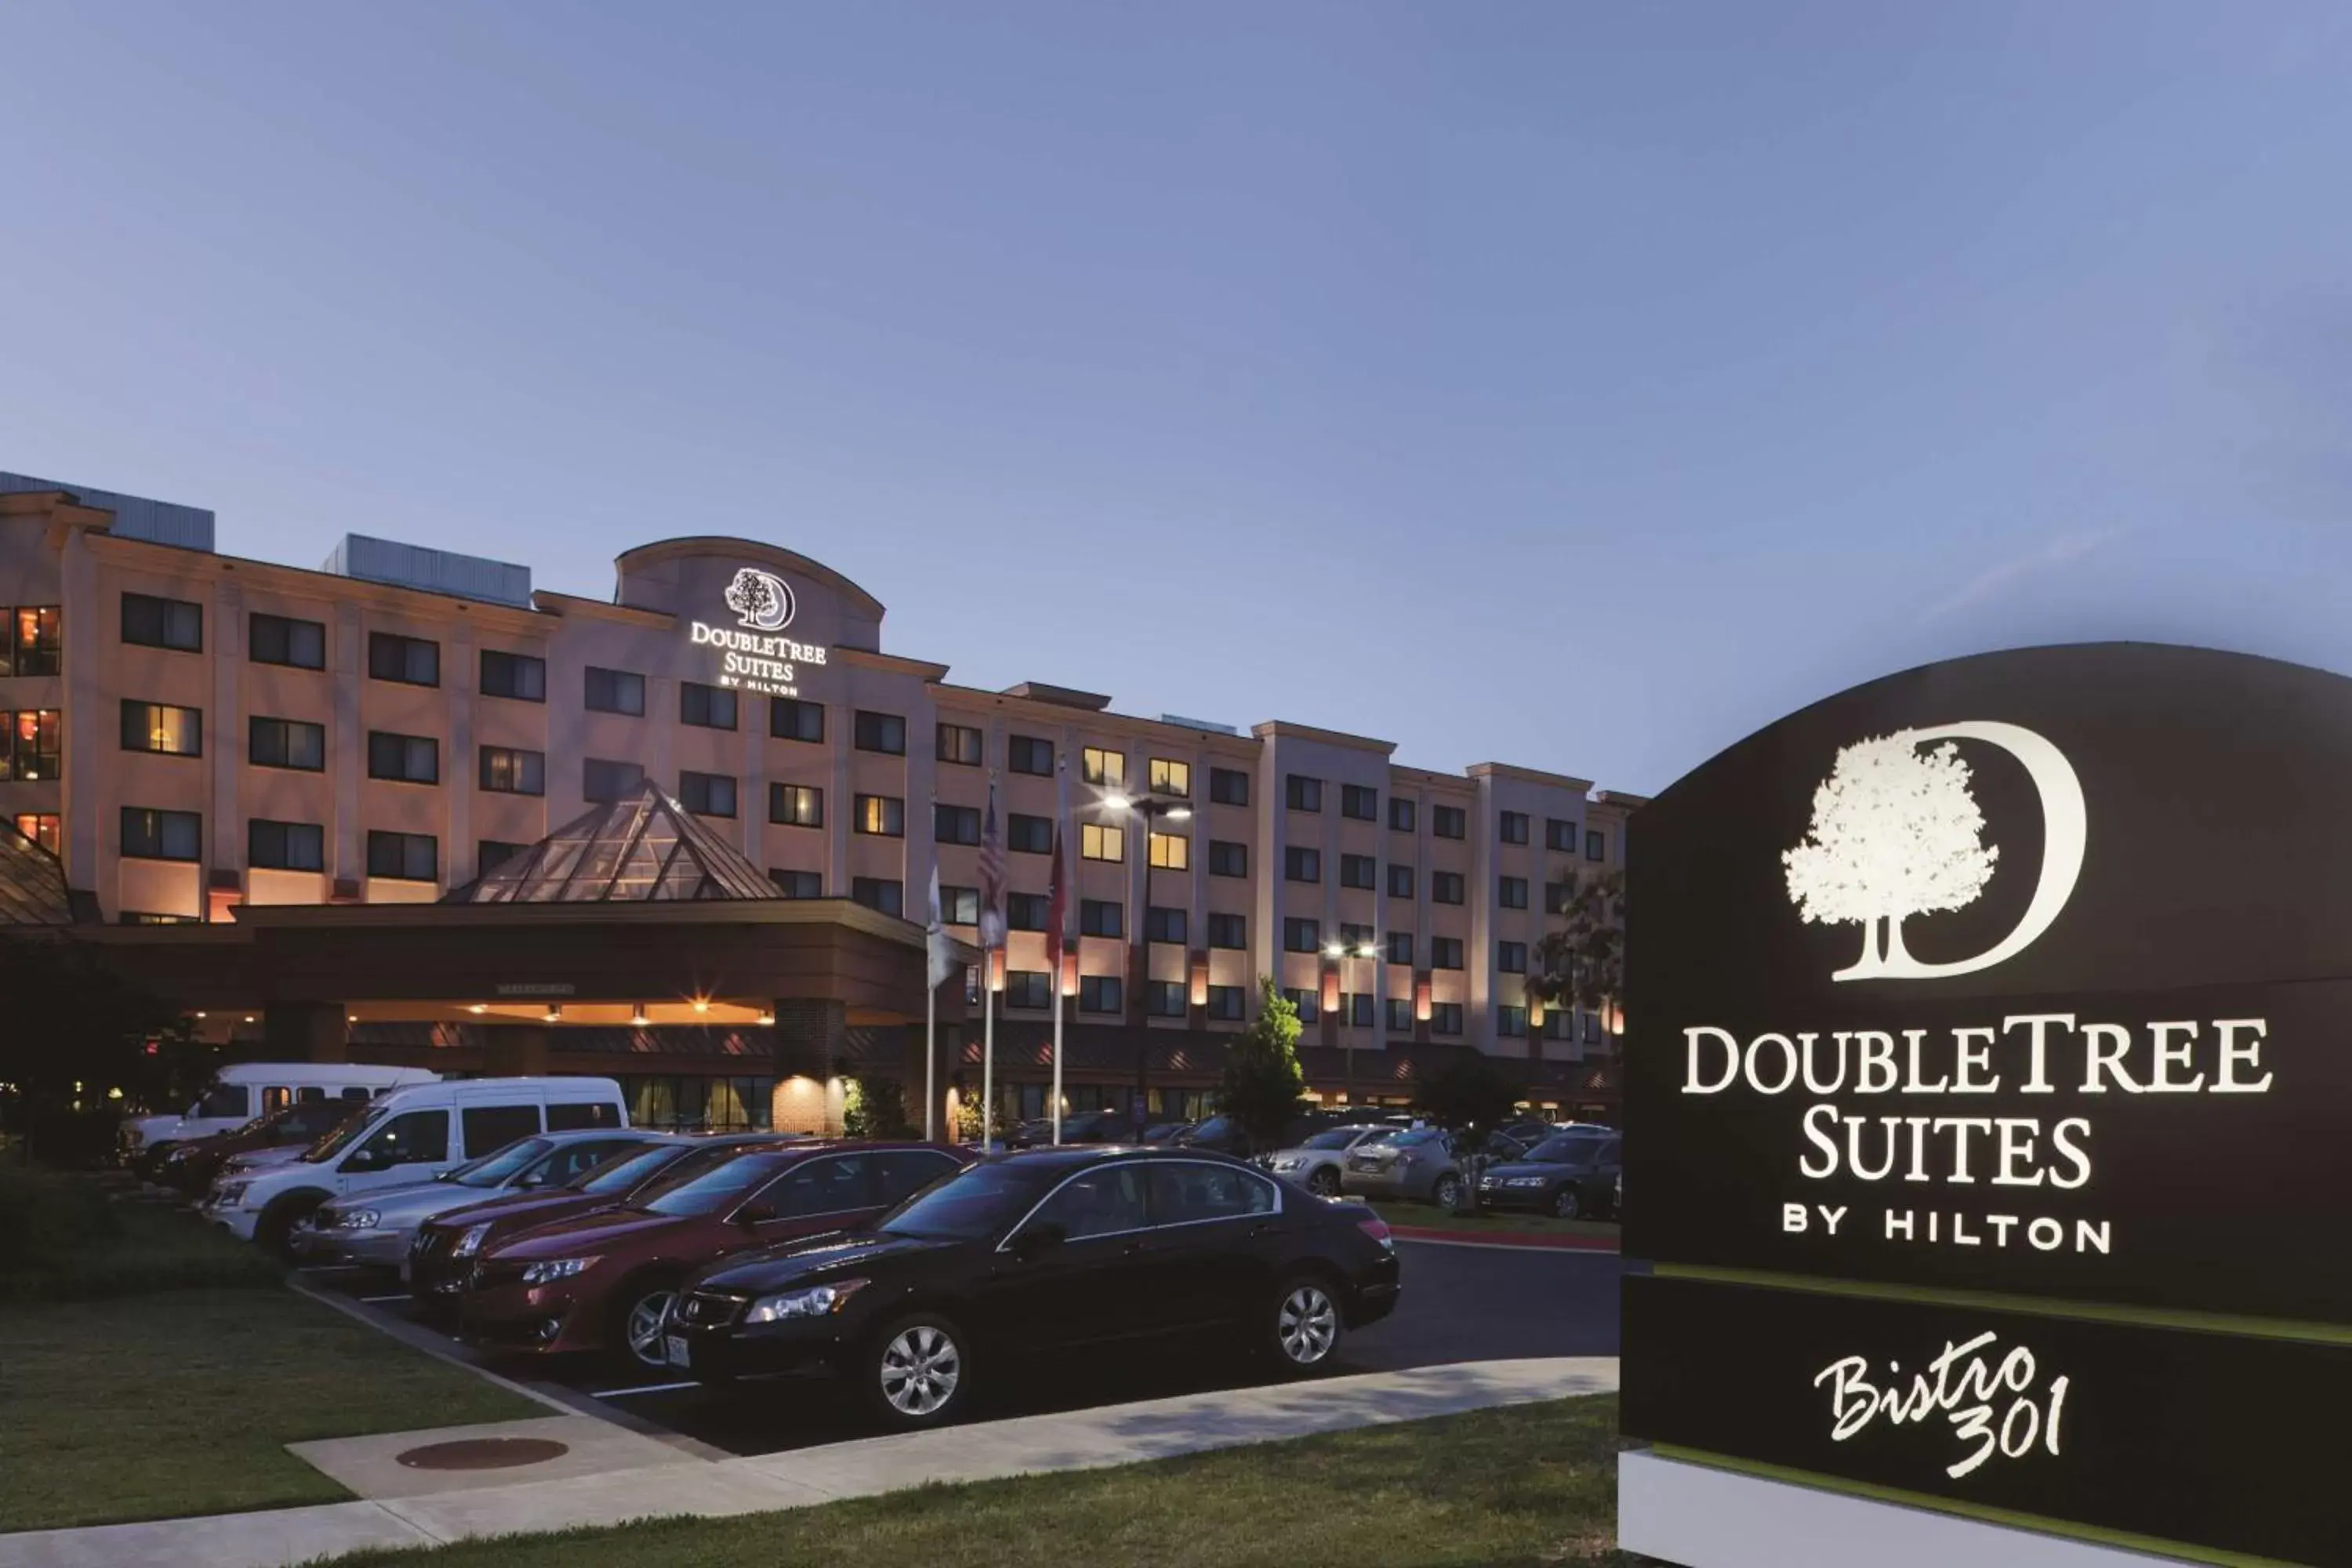 Property Building in DoubleTree Suites by Hilton Bentonville